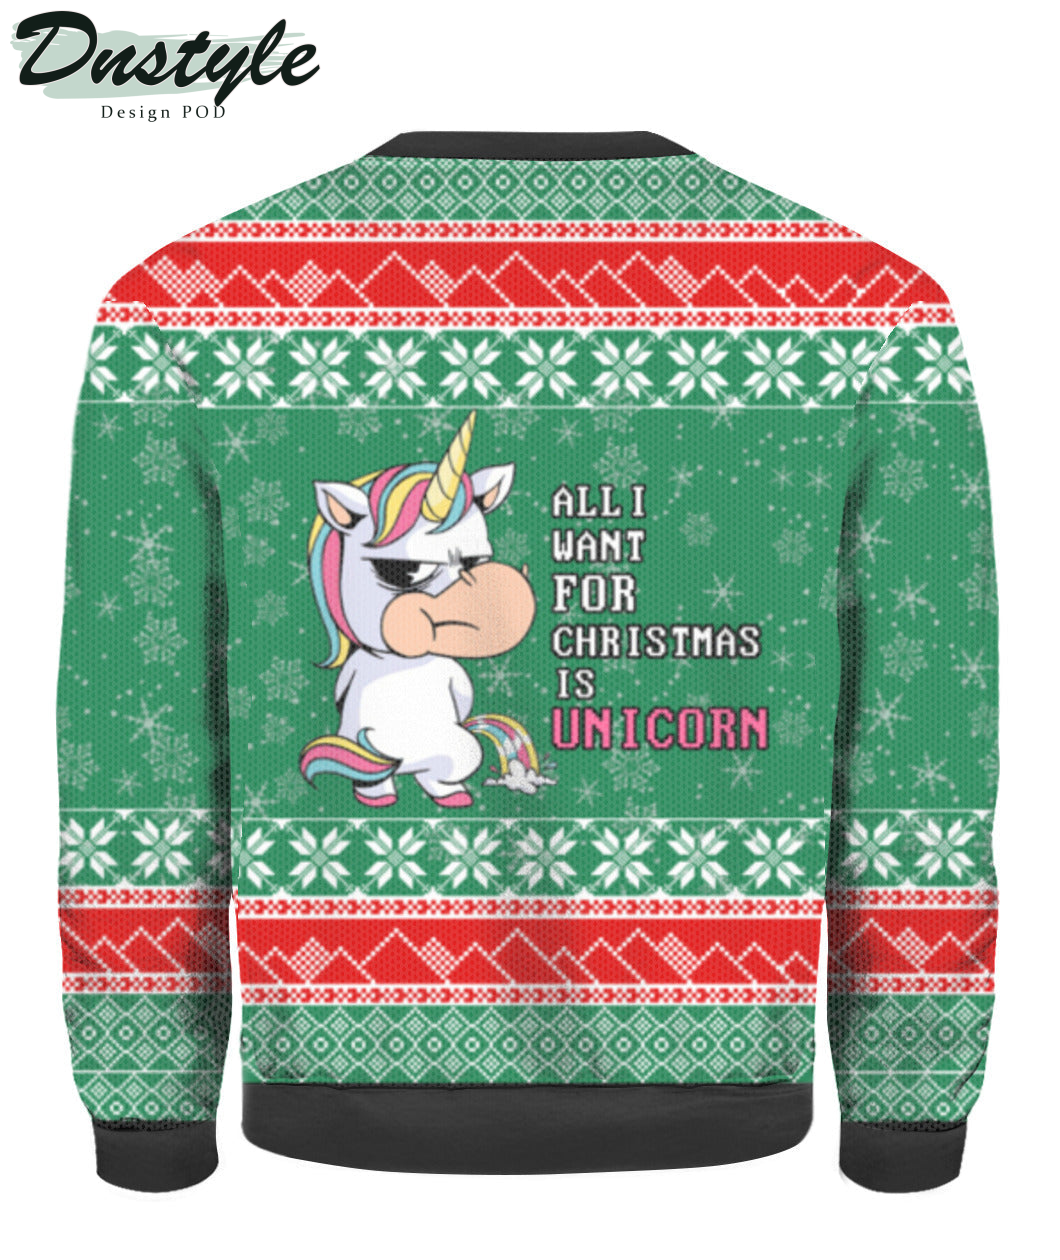 All I Want For Christmas Is Unicorn Ugly Christmas Sweater